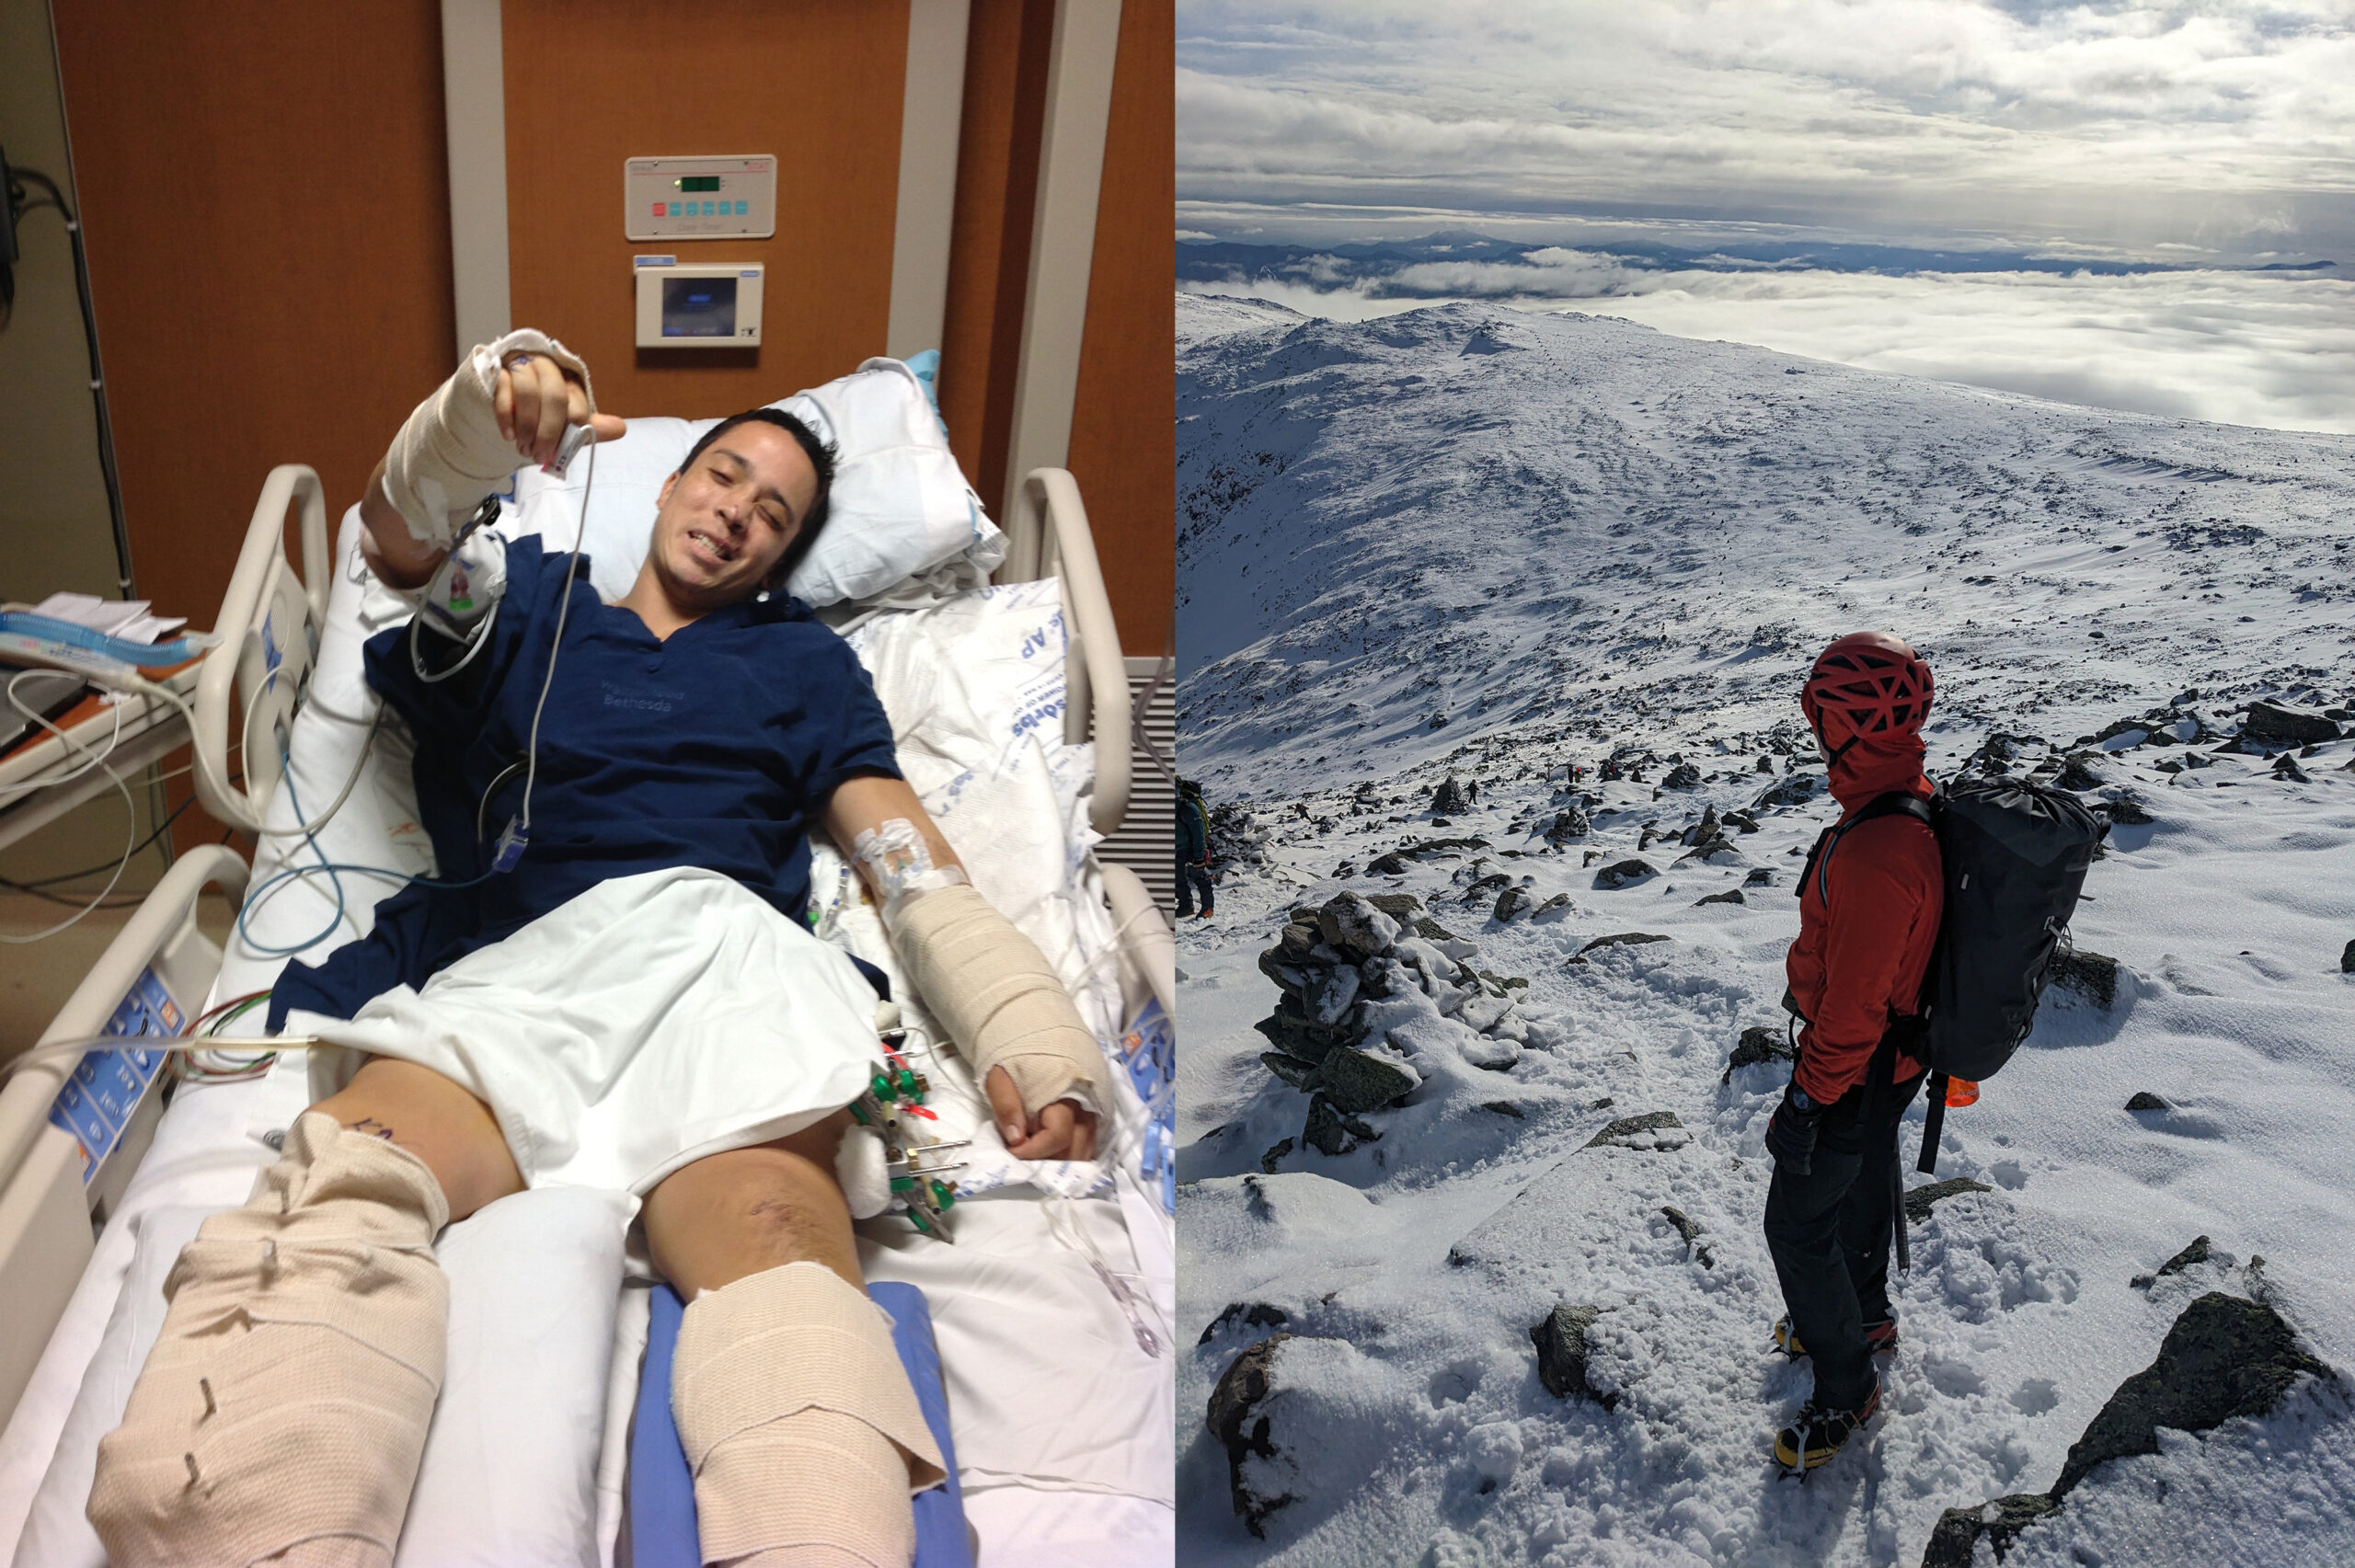 Two images of Jared: One in a hospital bed and on standing on snow